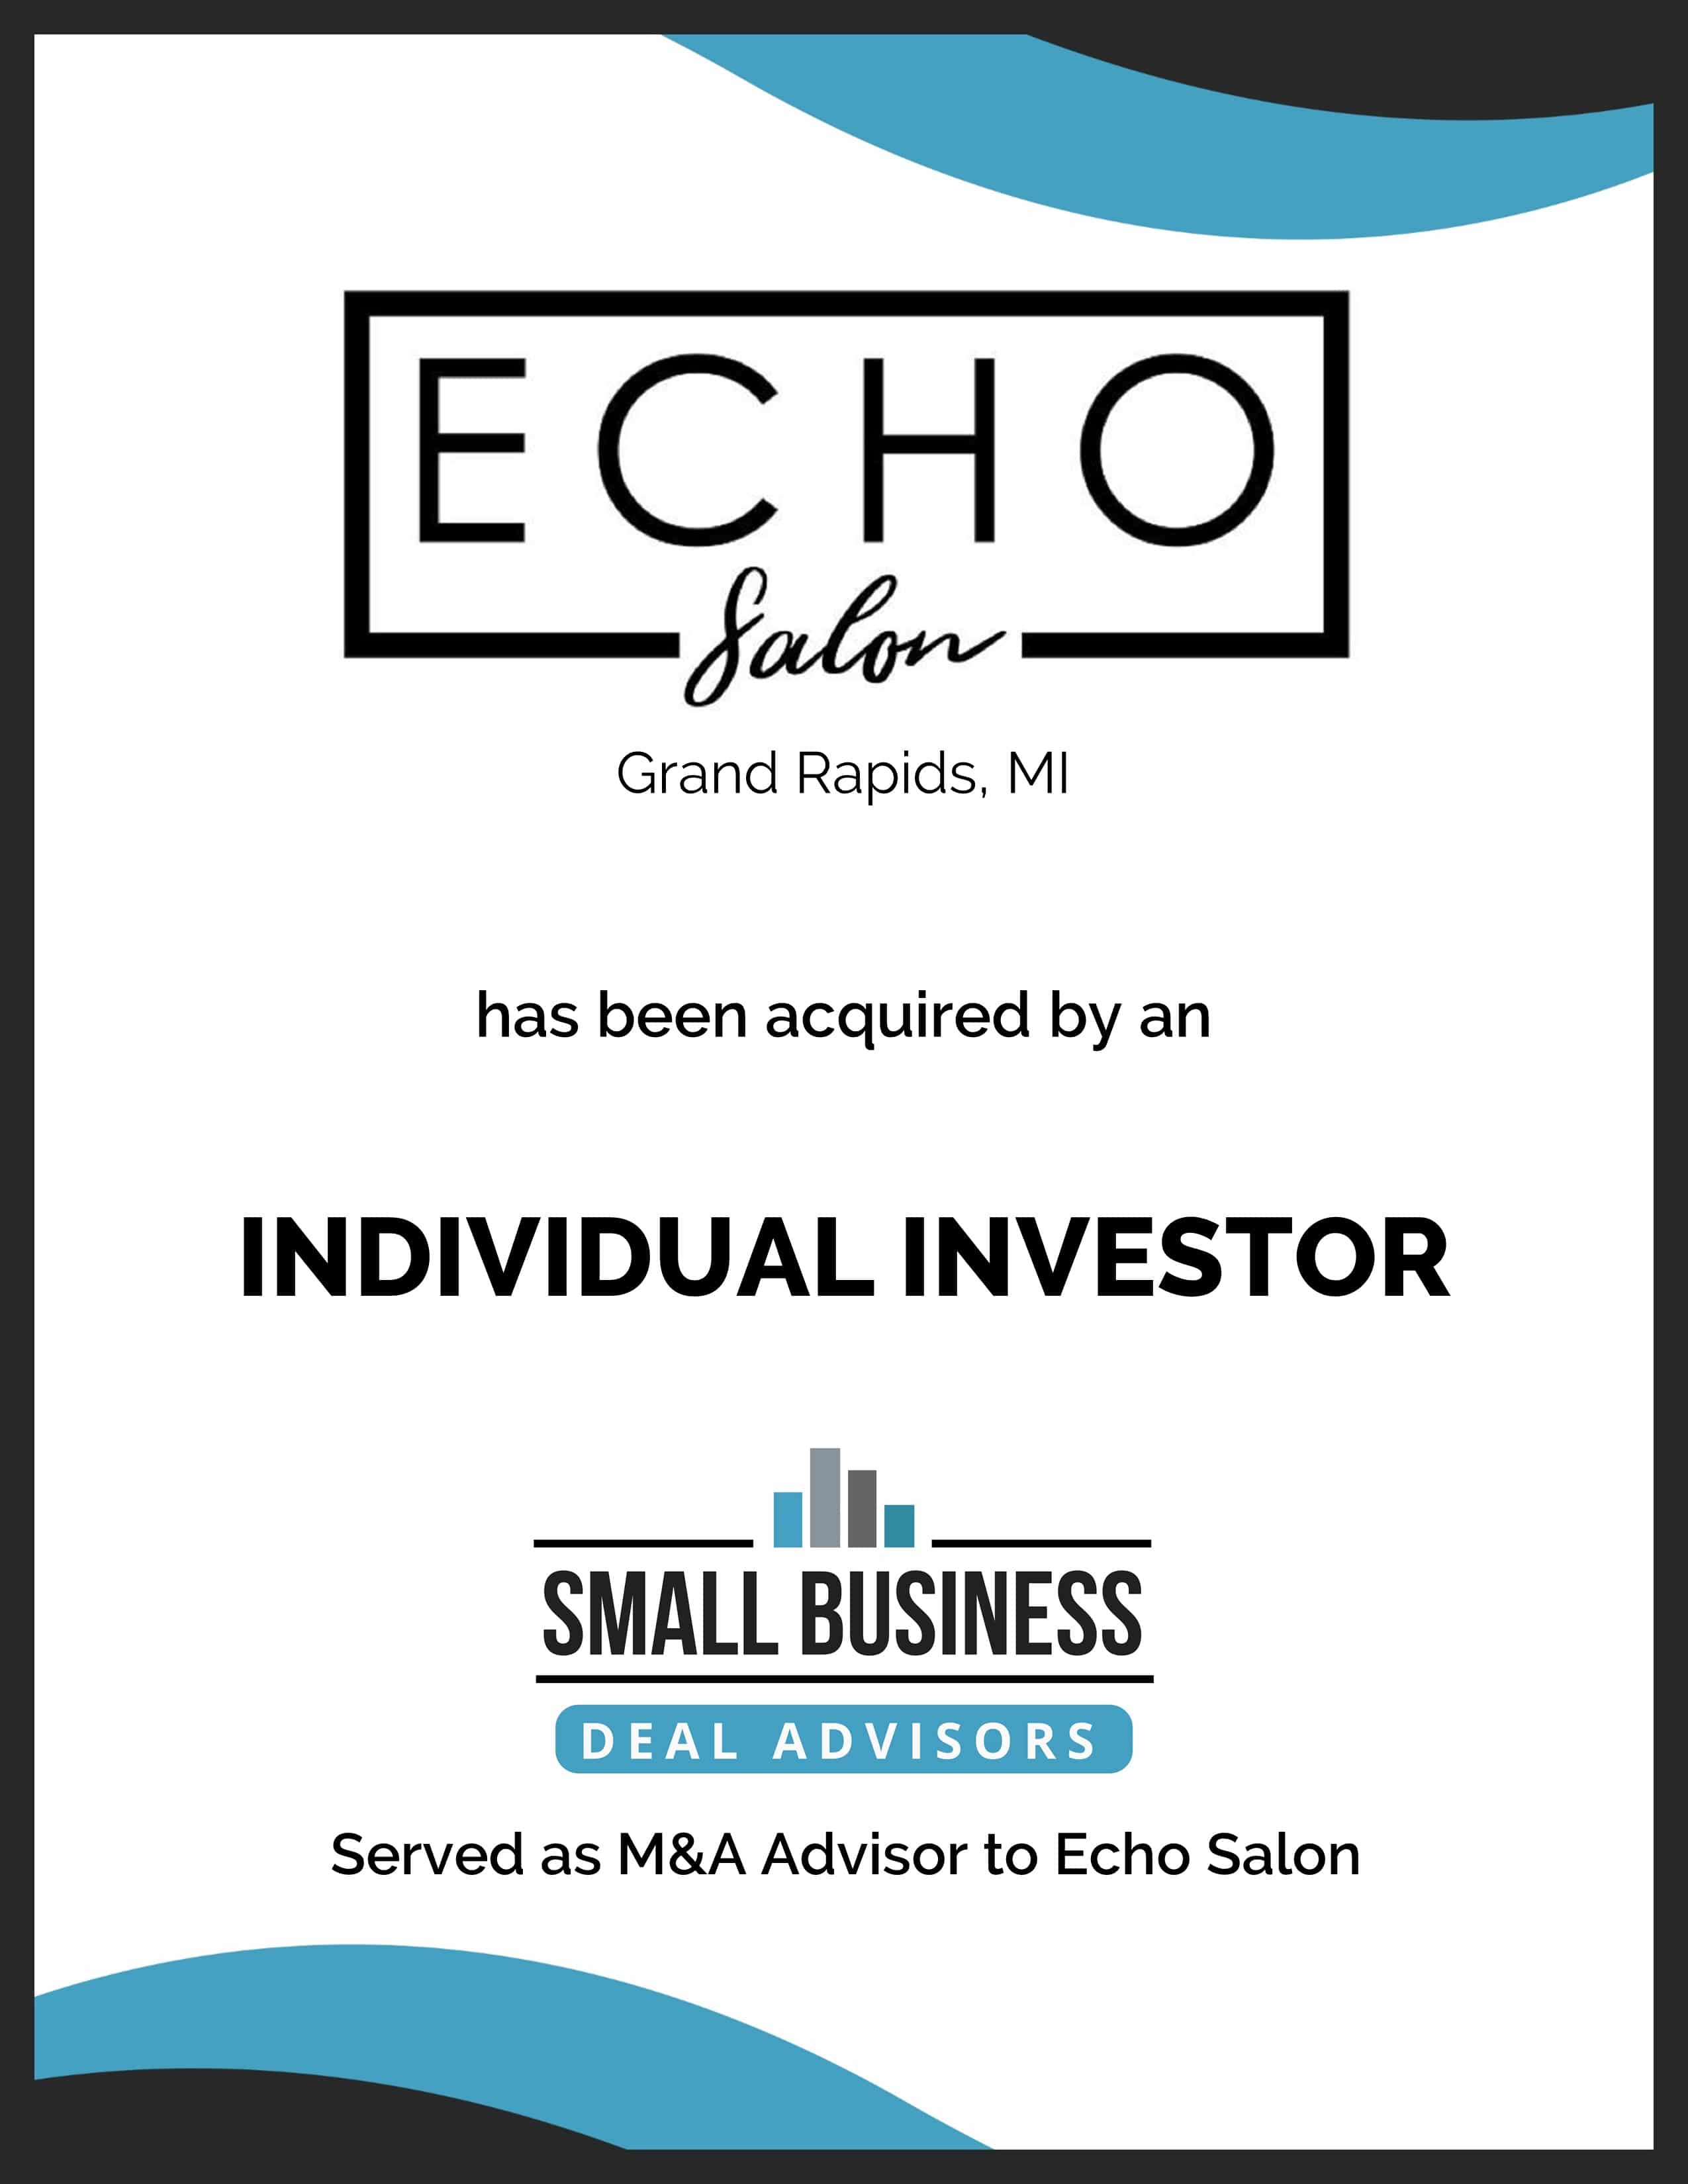 Echo Salon Sold to an Individual Investor